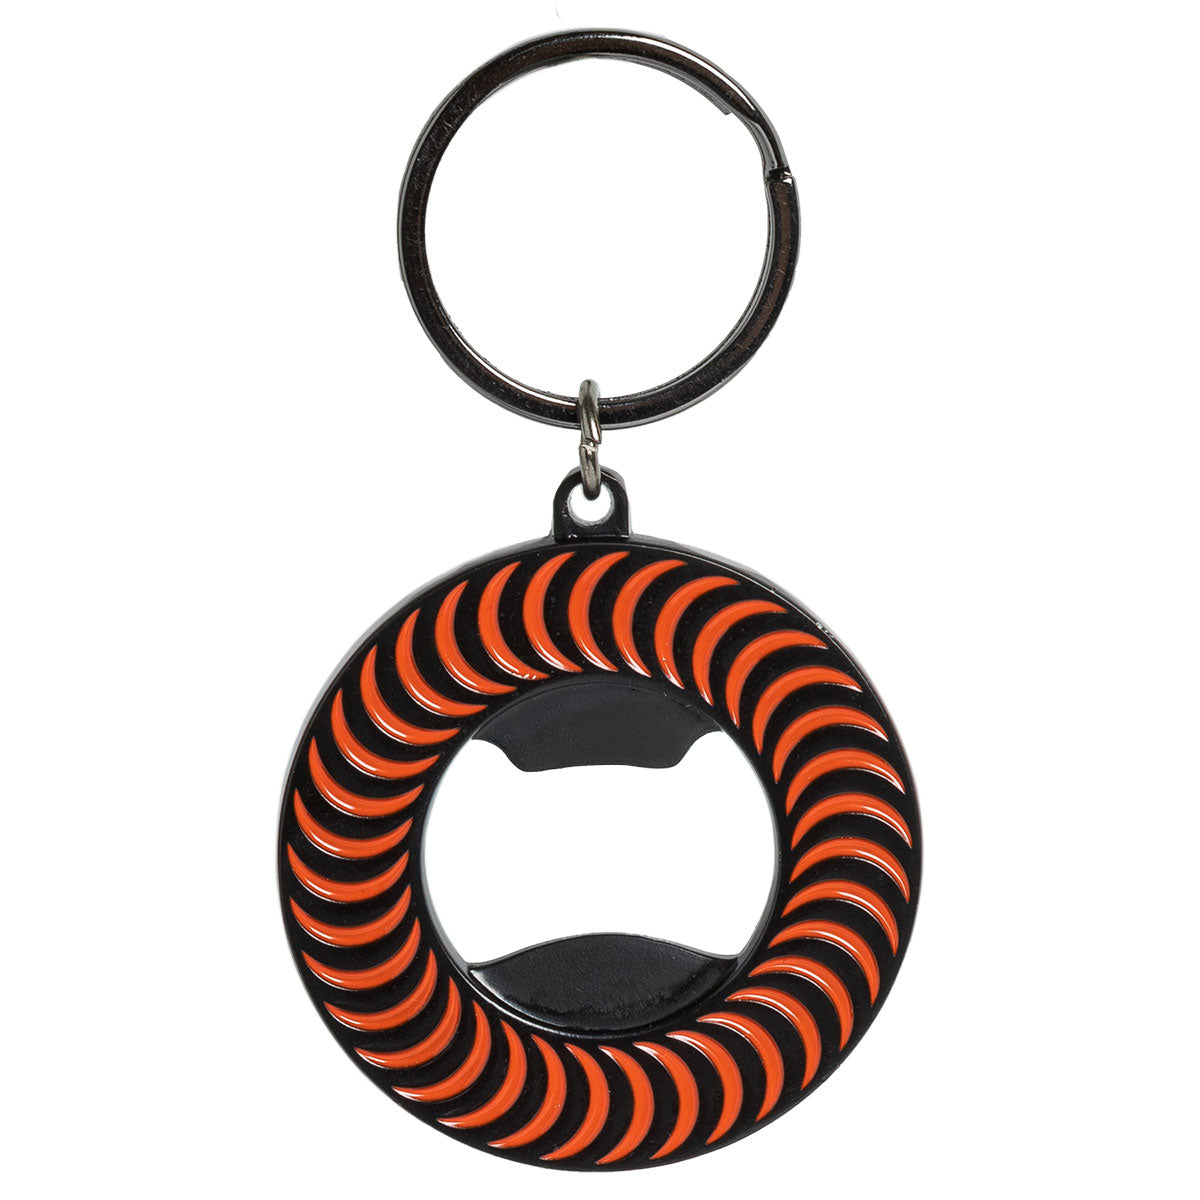 Spitfire Classic Swirl Keychains - Black/Red image 1